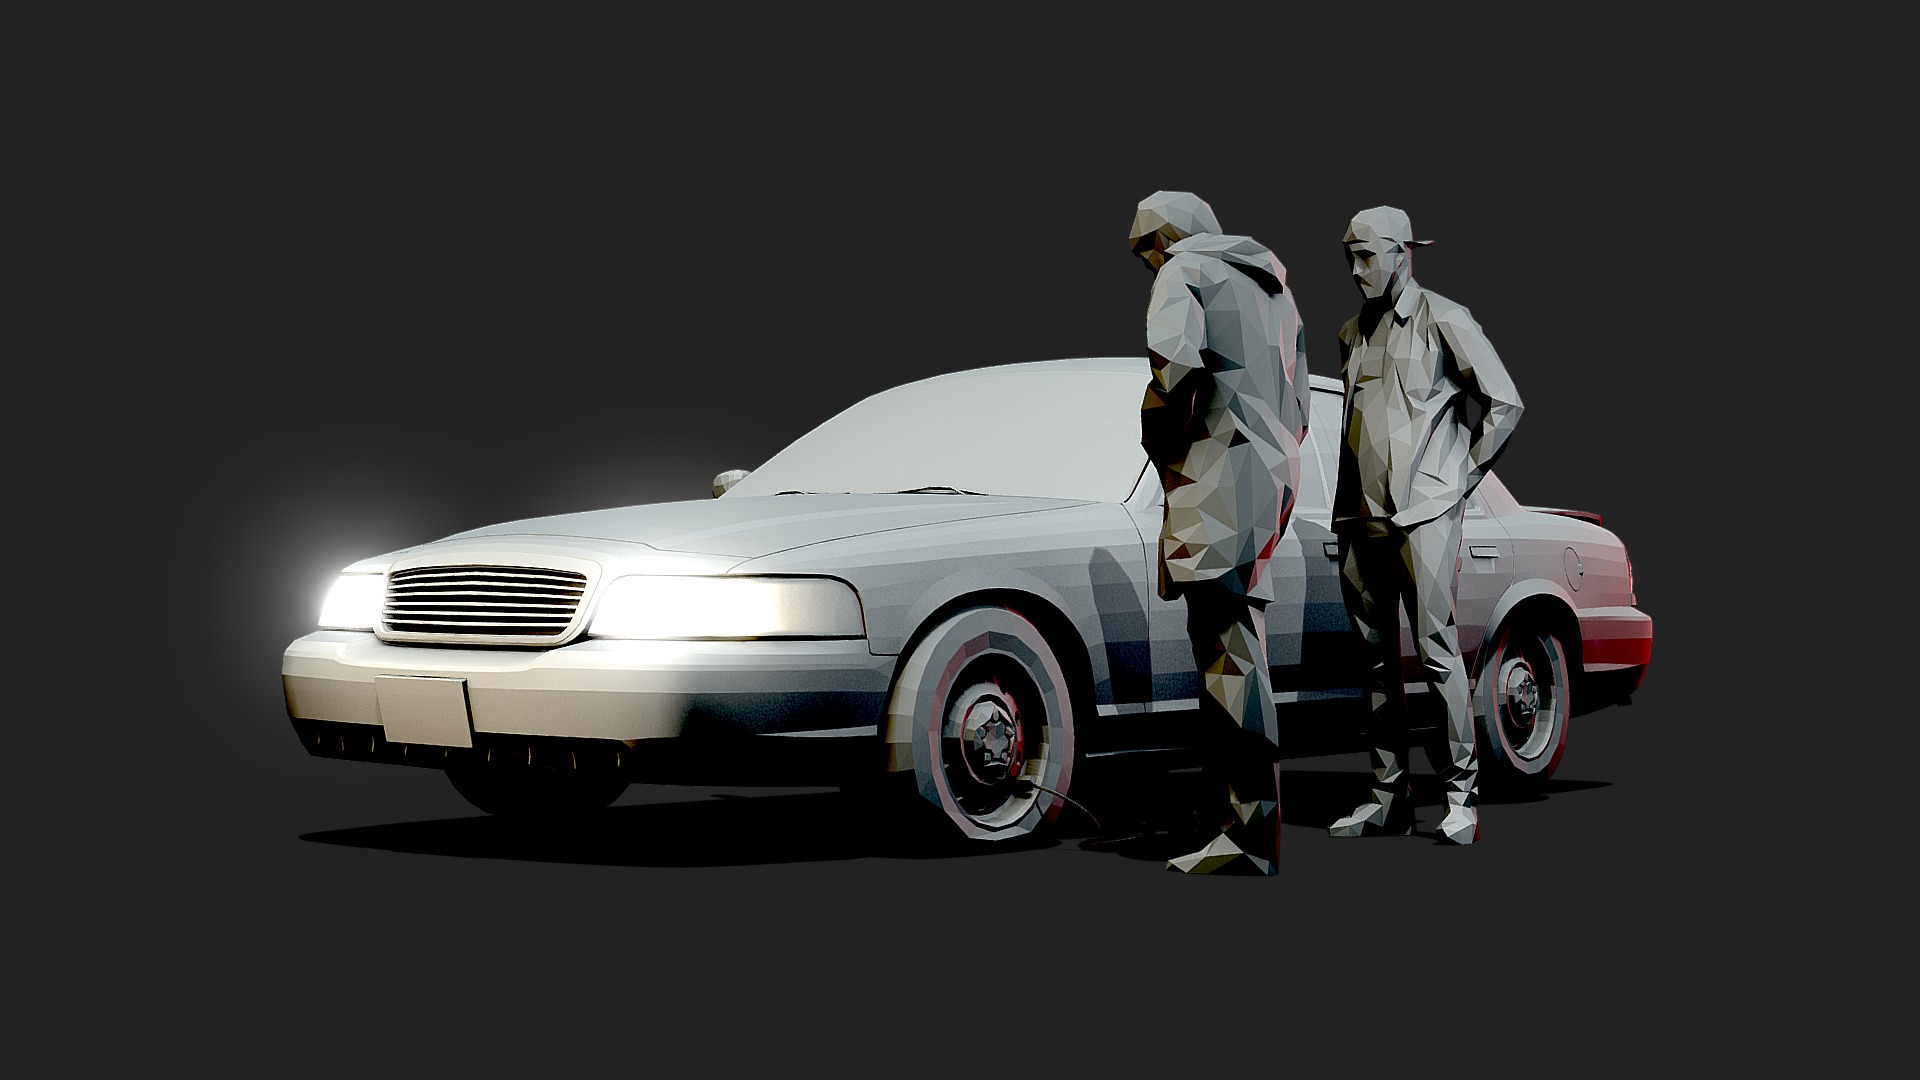 3D model Road Accident [Alternative Render] - This is a 3D model of the Road Accident [Alternative Render]. The 3D model is about a couple of men in white suits standing next to a white car.